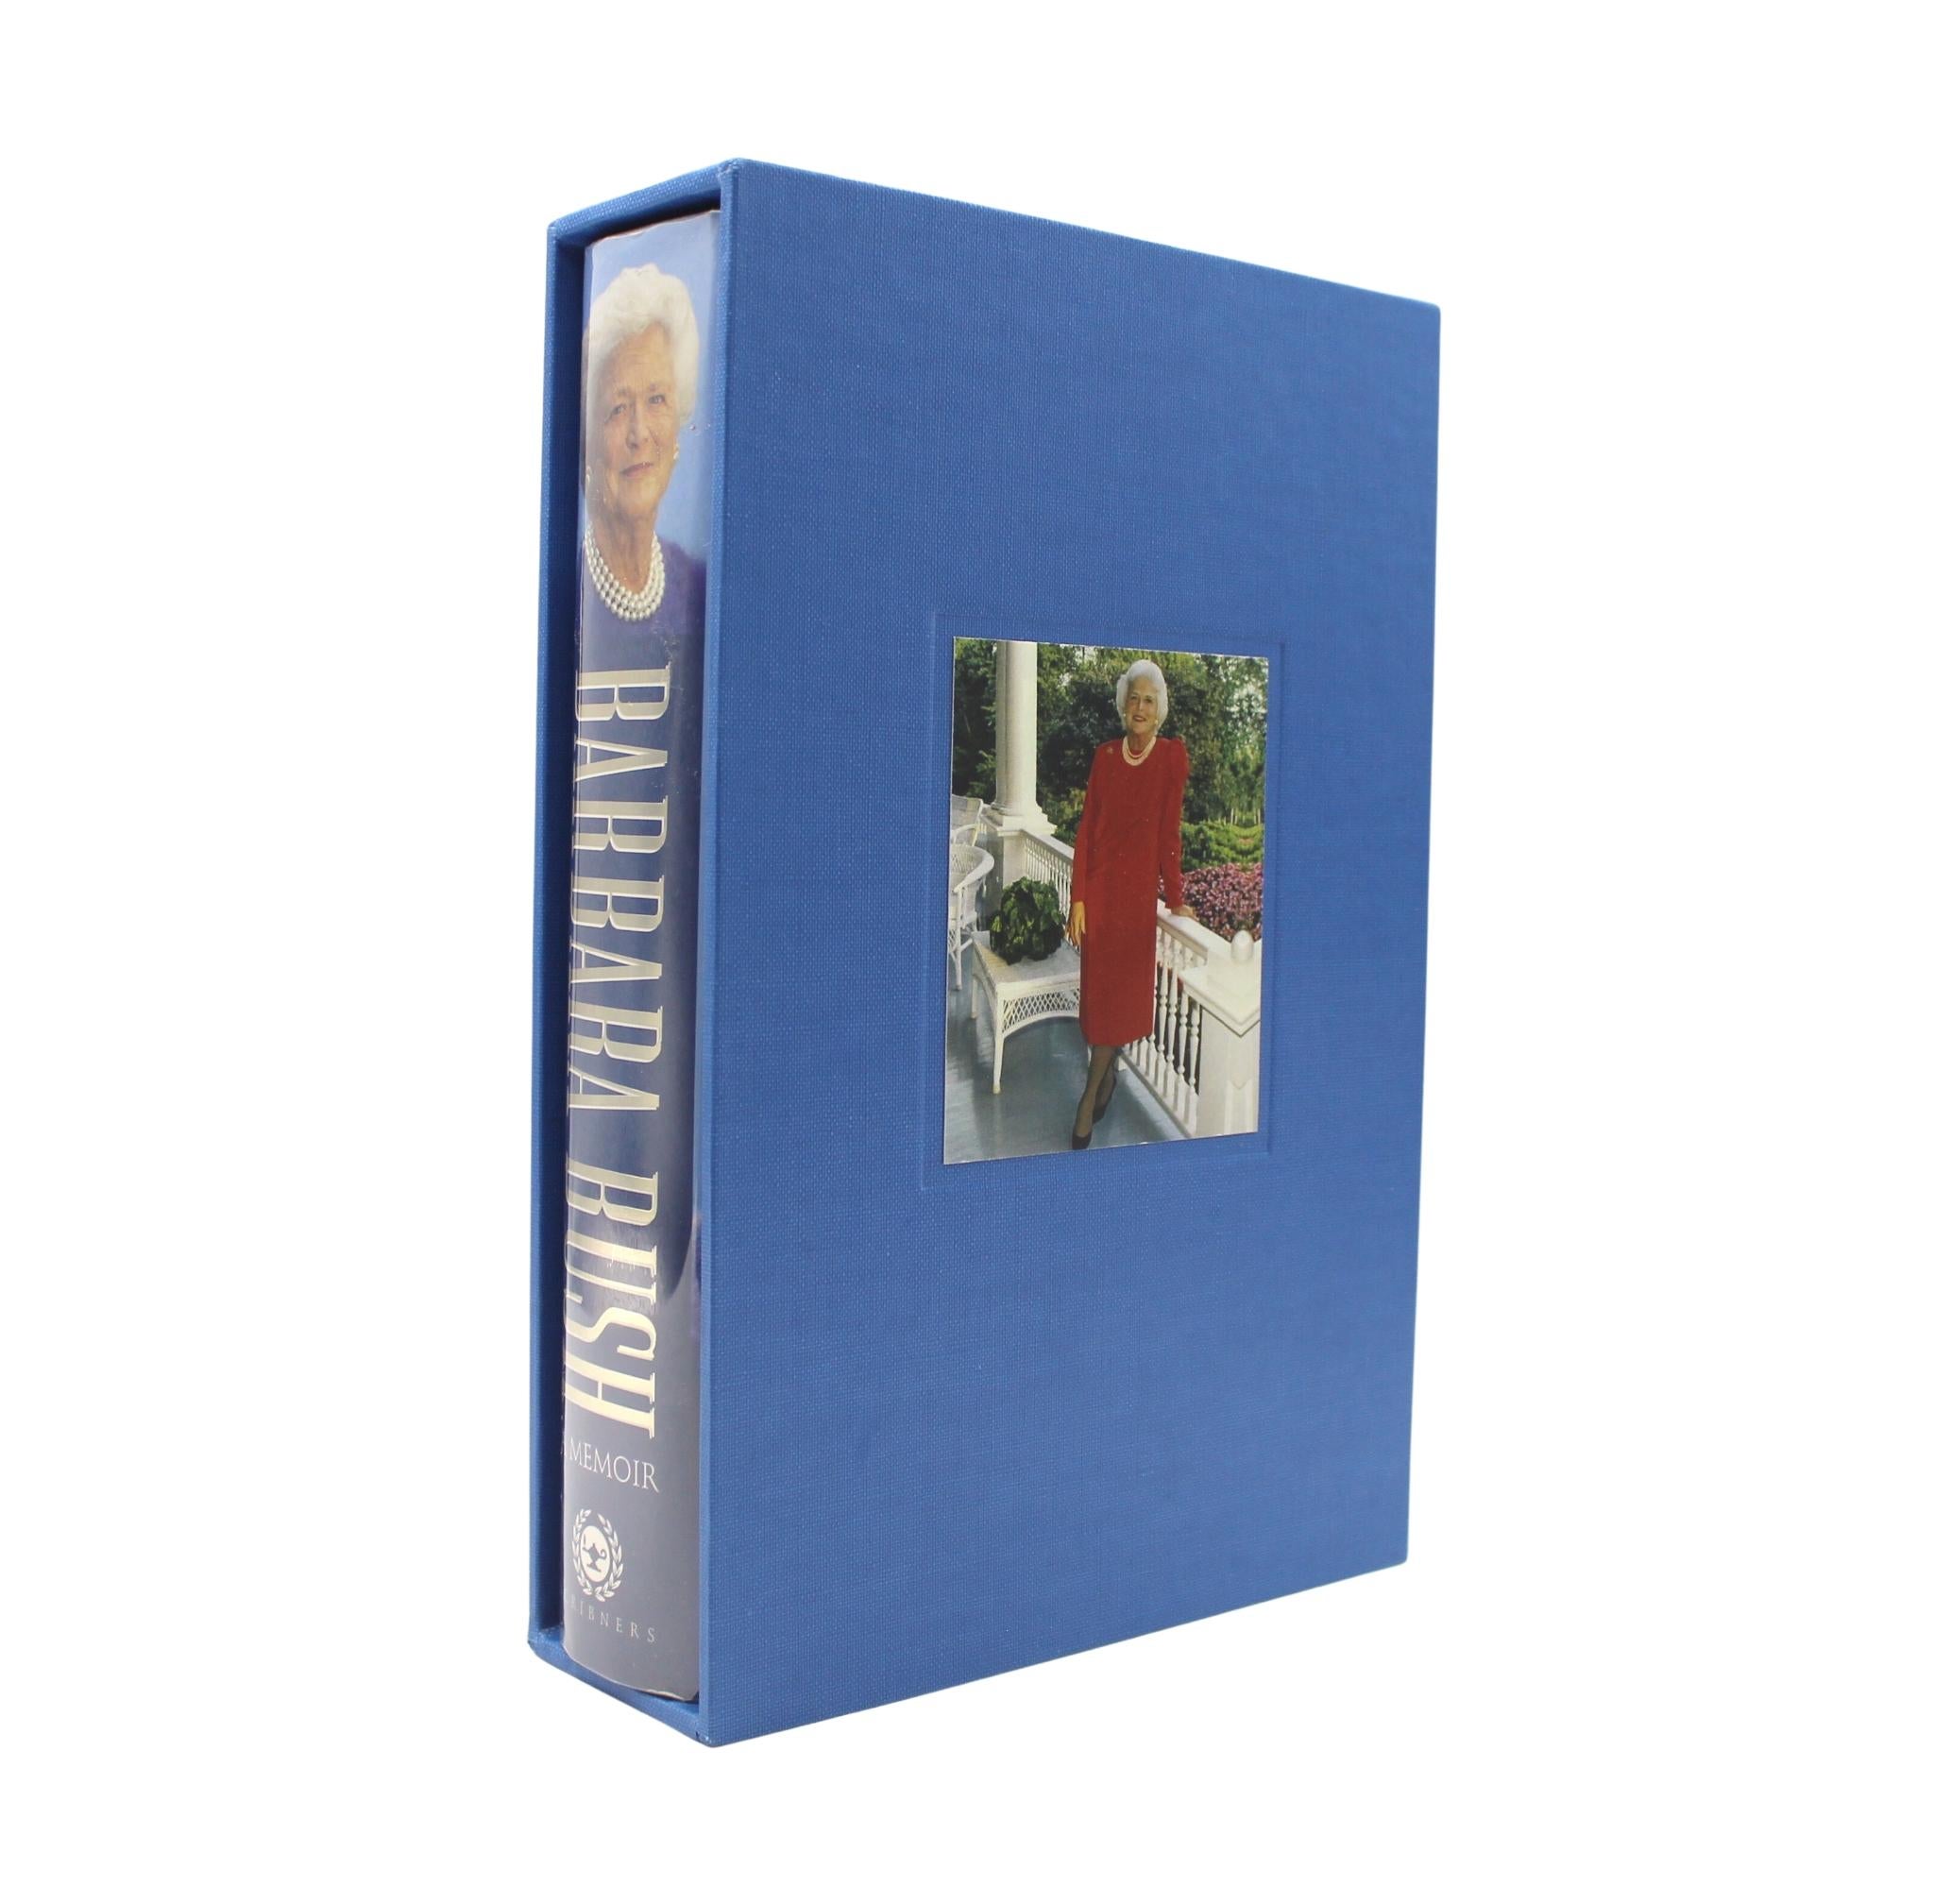 Bush, Barbara. A Memoir: Barbara Bush. New York: Lisa Drew Books/Scribner, 1994. Signed by Barbara. In publisher's original boards and dust jacket. Presented with a new archival matching blue slipcase. 

This is a signed printing of Barbara Bush’s